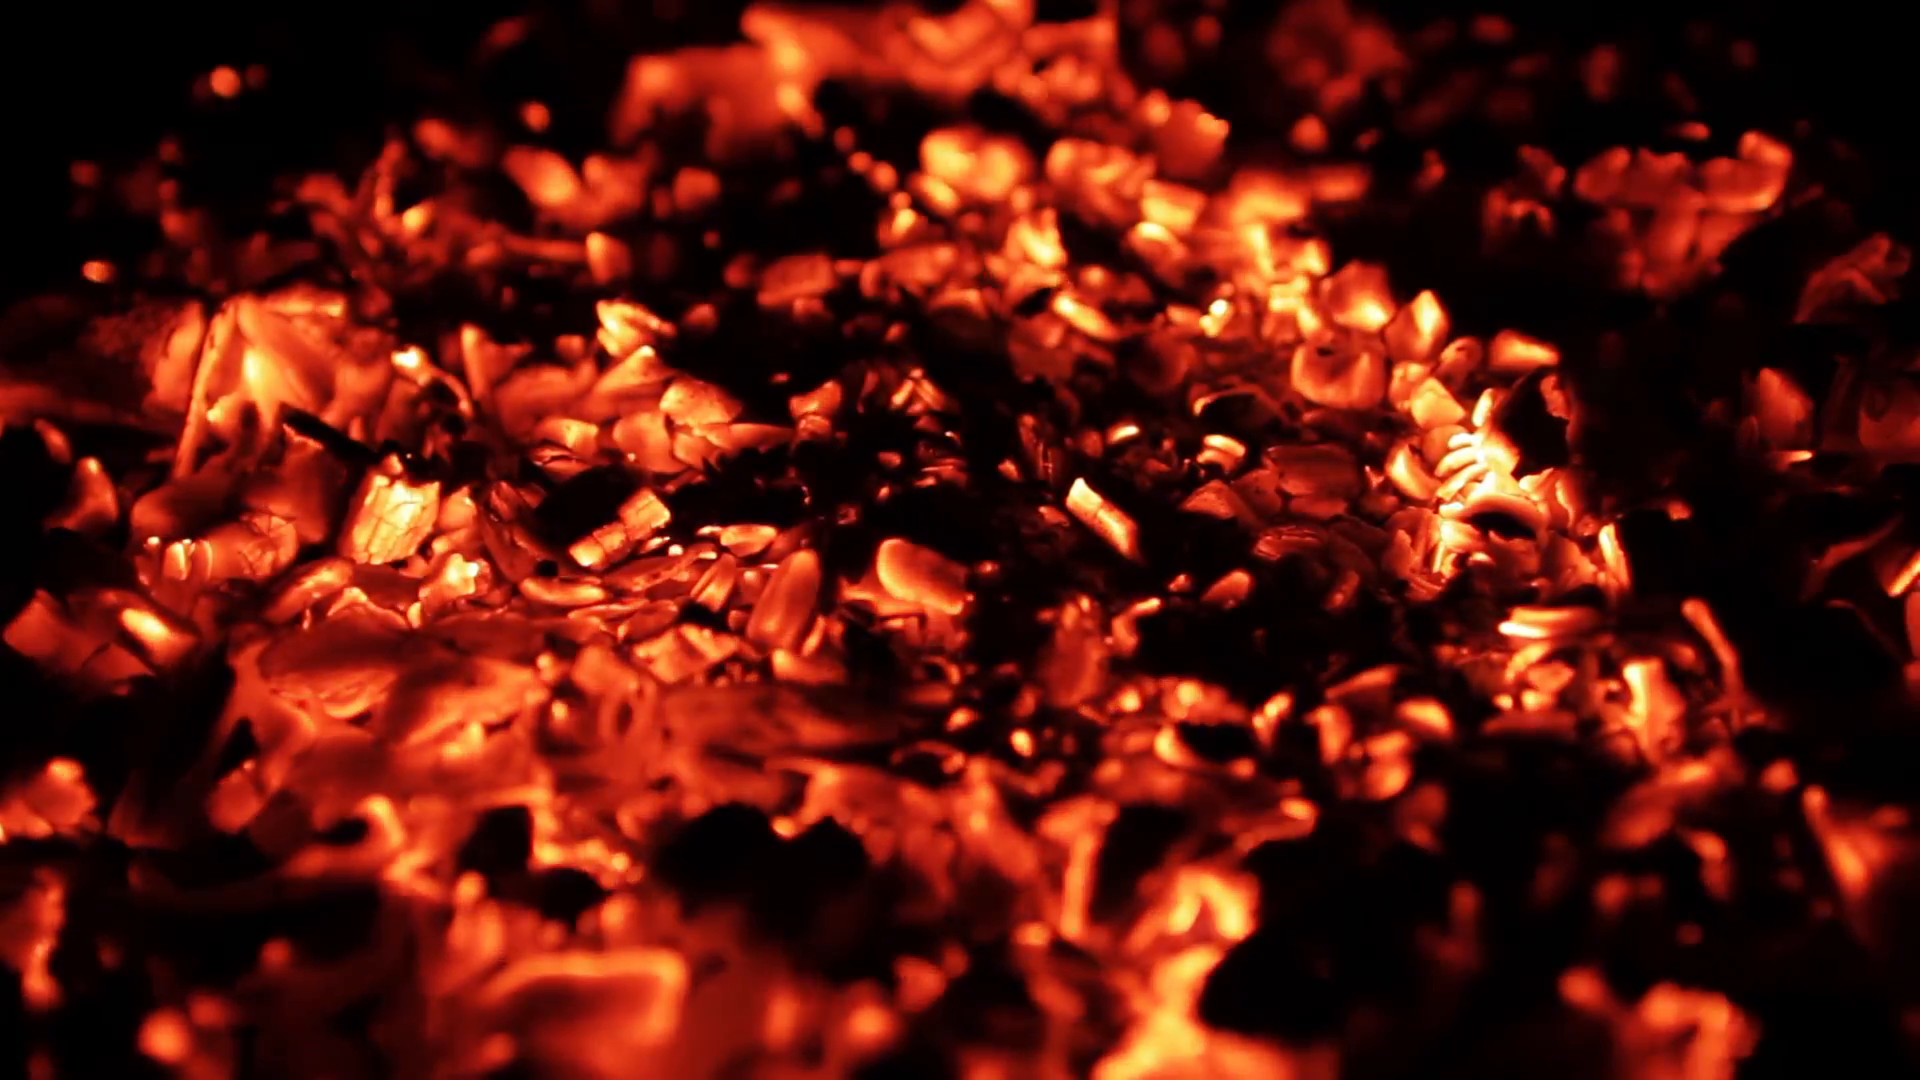 Burning Coal Png - Burning Coal, Close Up Of Red Hot Coals Glowed In Bonfire Stock Video Footage   Videoblocks, Transparent background PNG HD thumbnail